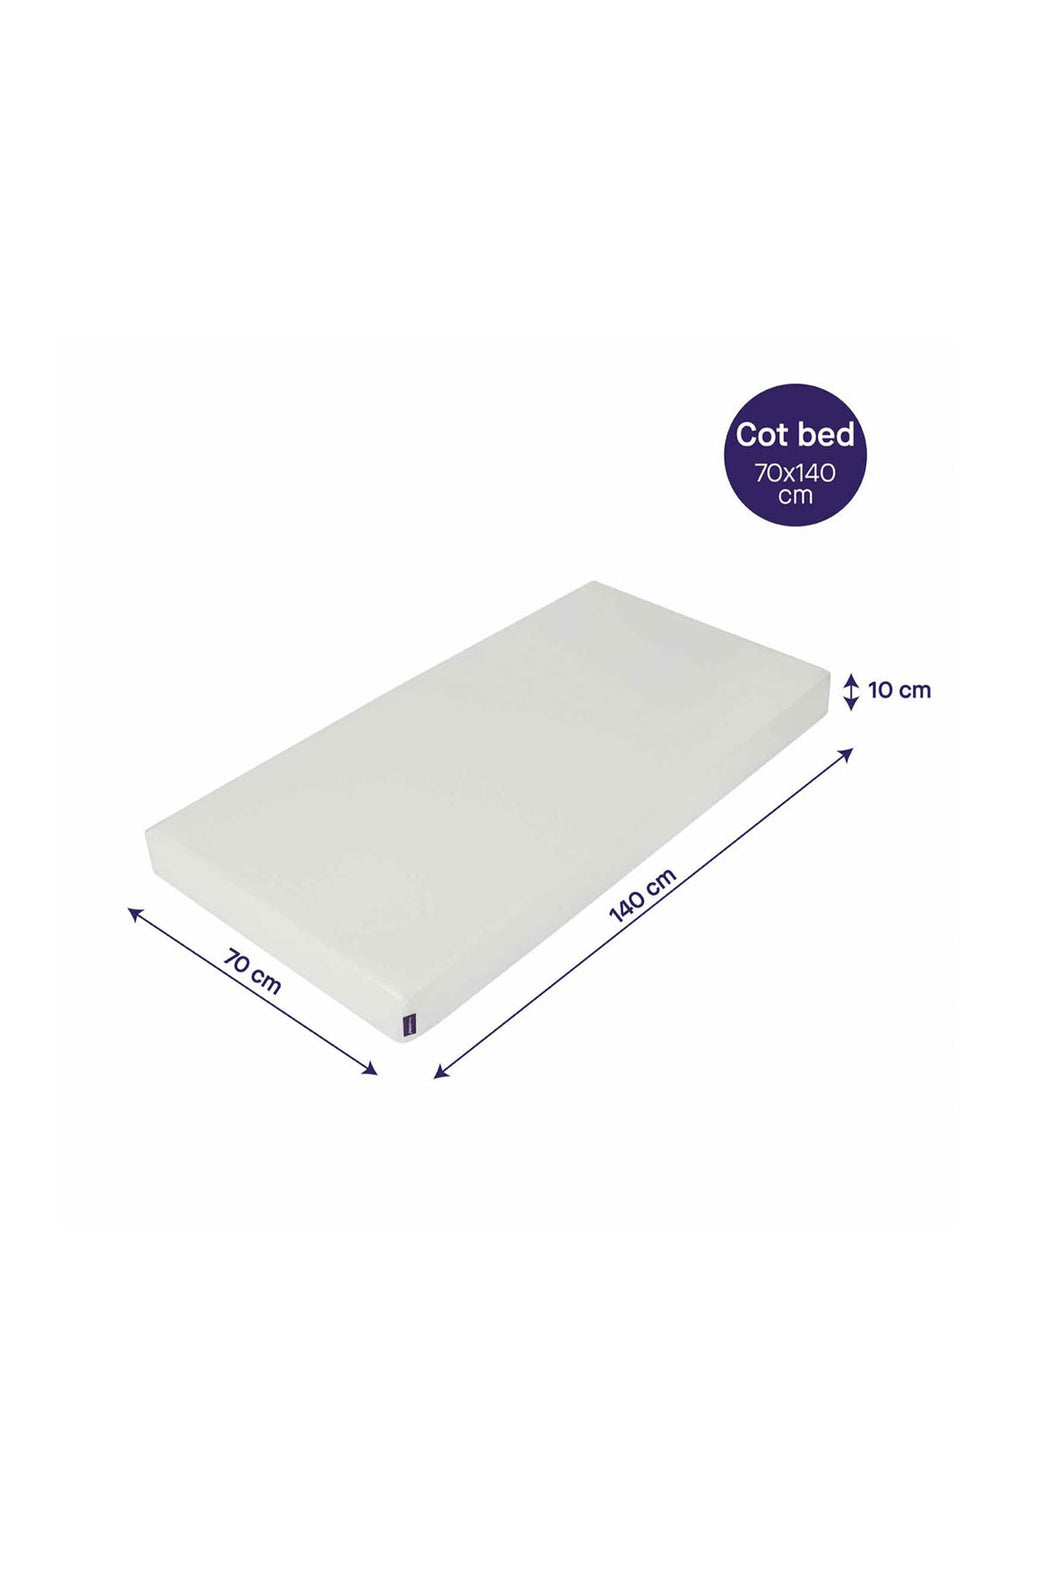 Clevamama Anti-Allergy Mattress Cot Bed 140*70